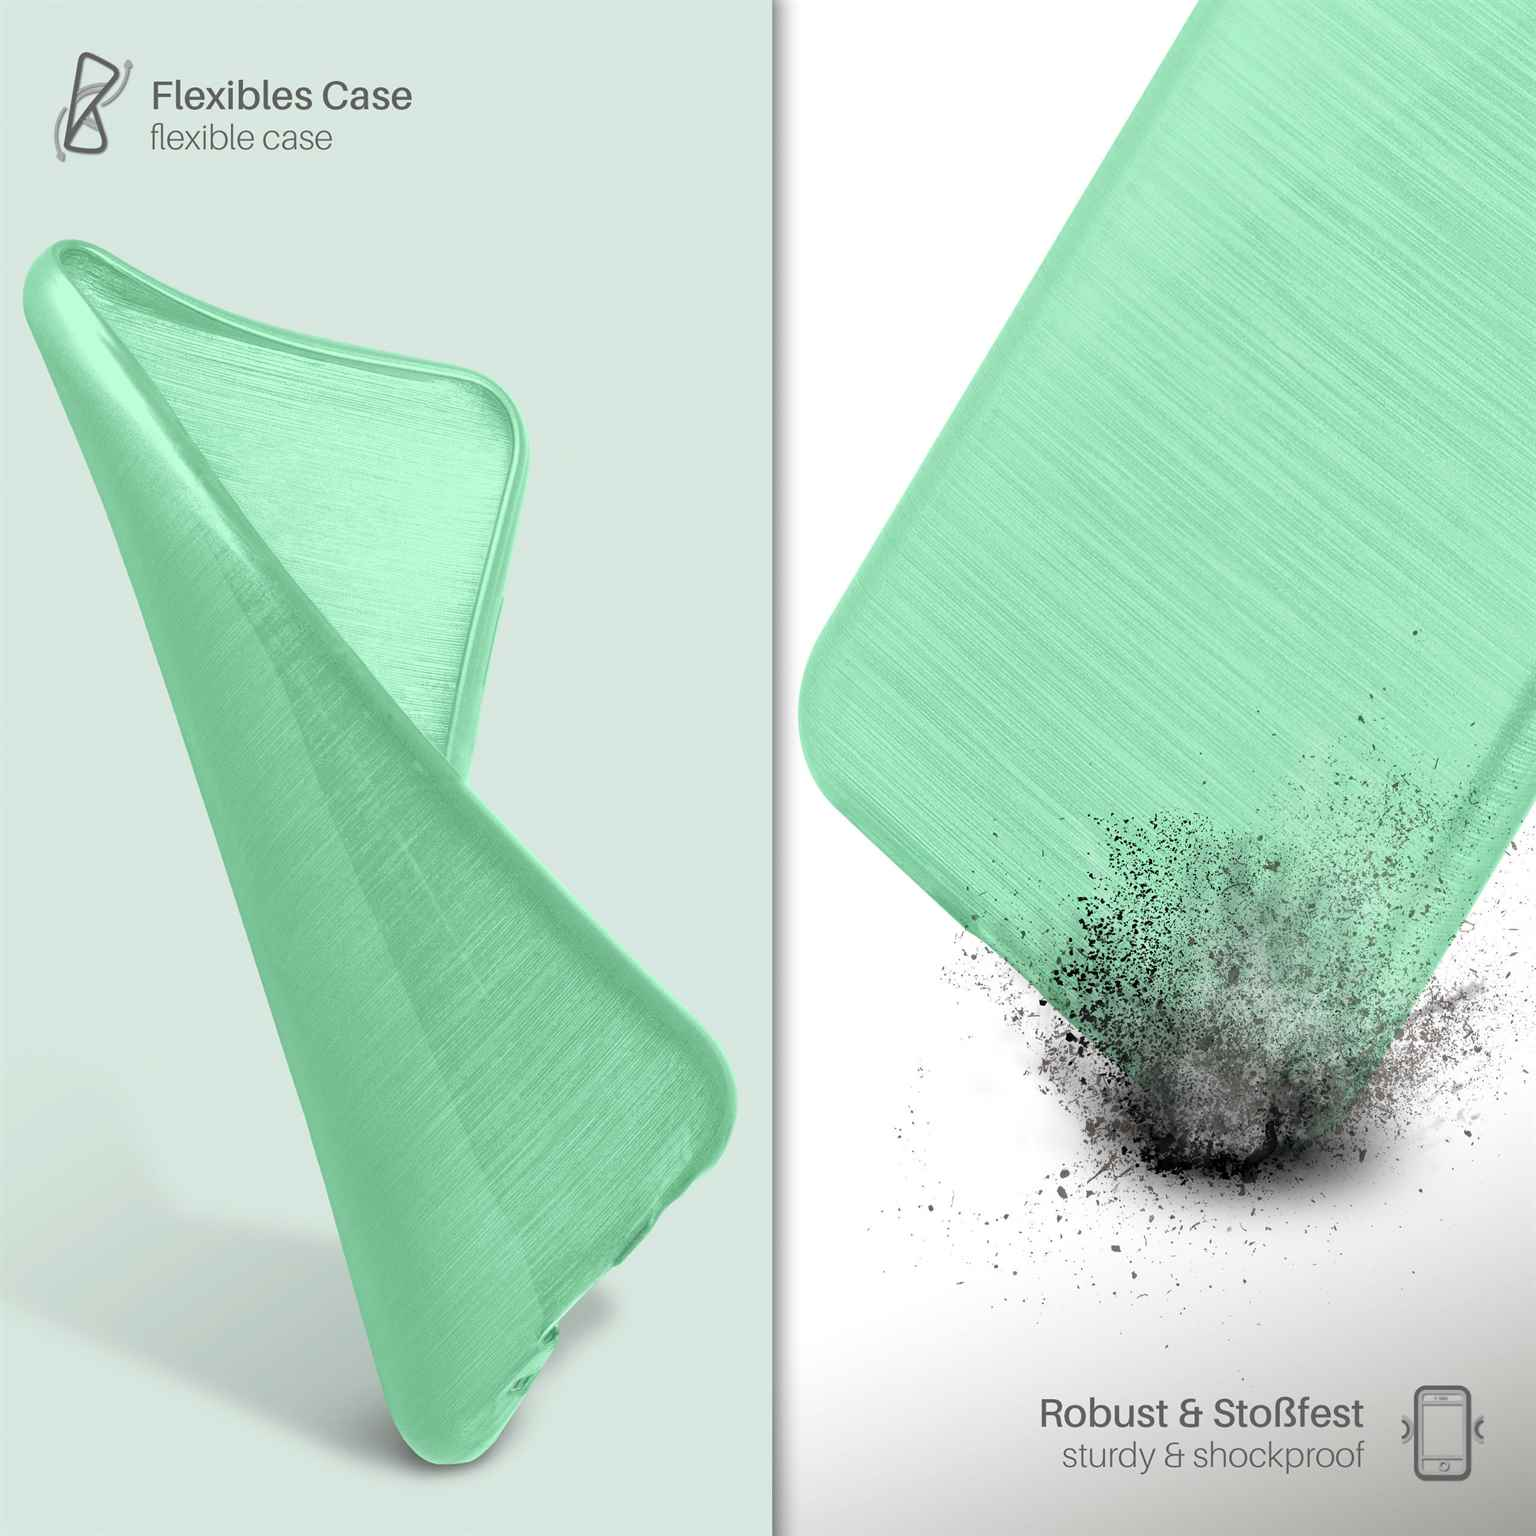 Case, Brushed MOEX Galaxy Backcover, Samsung, S4, Mint-Green